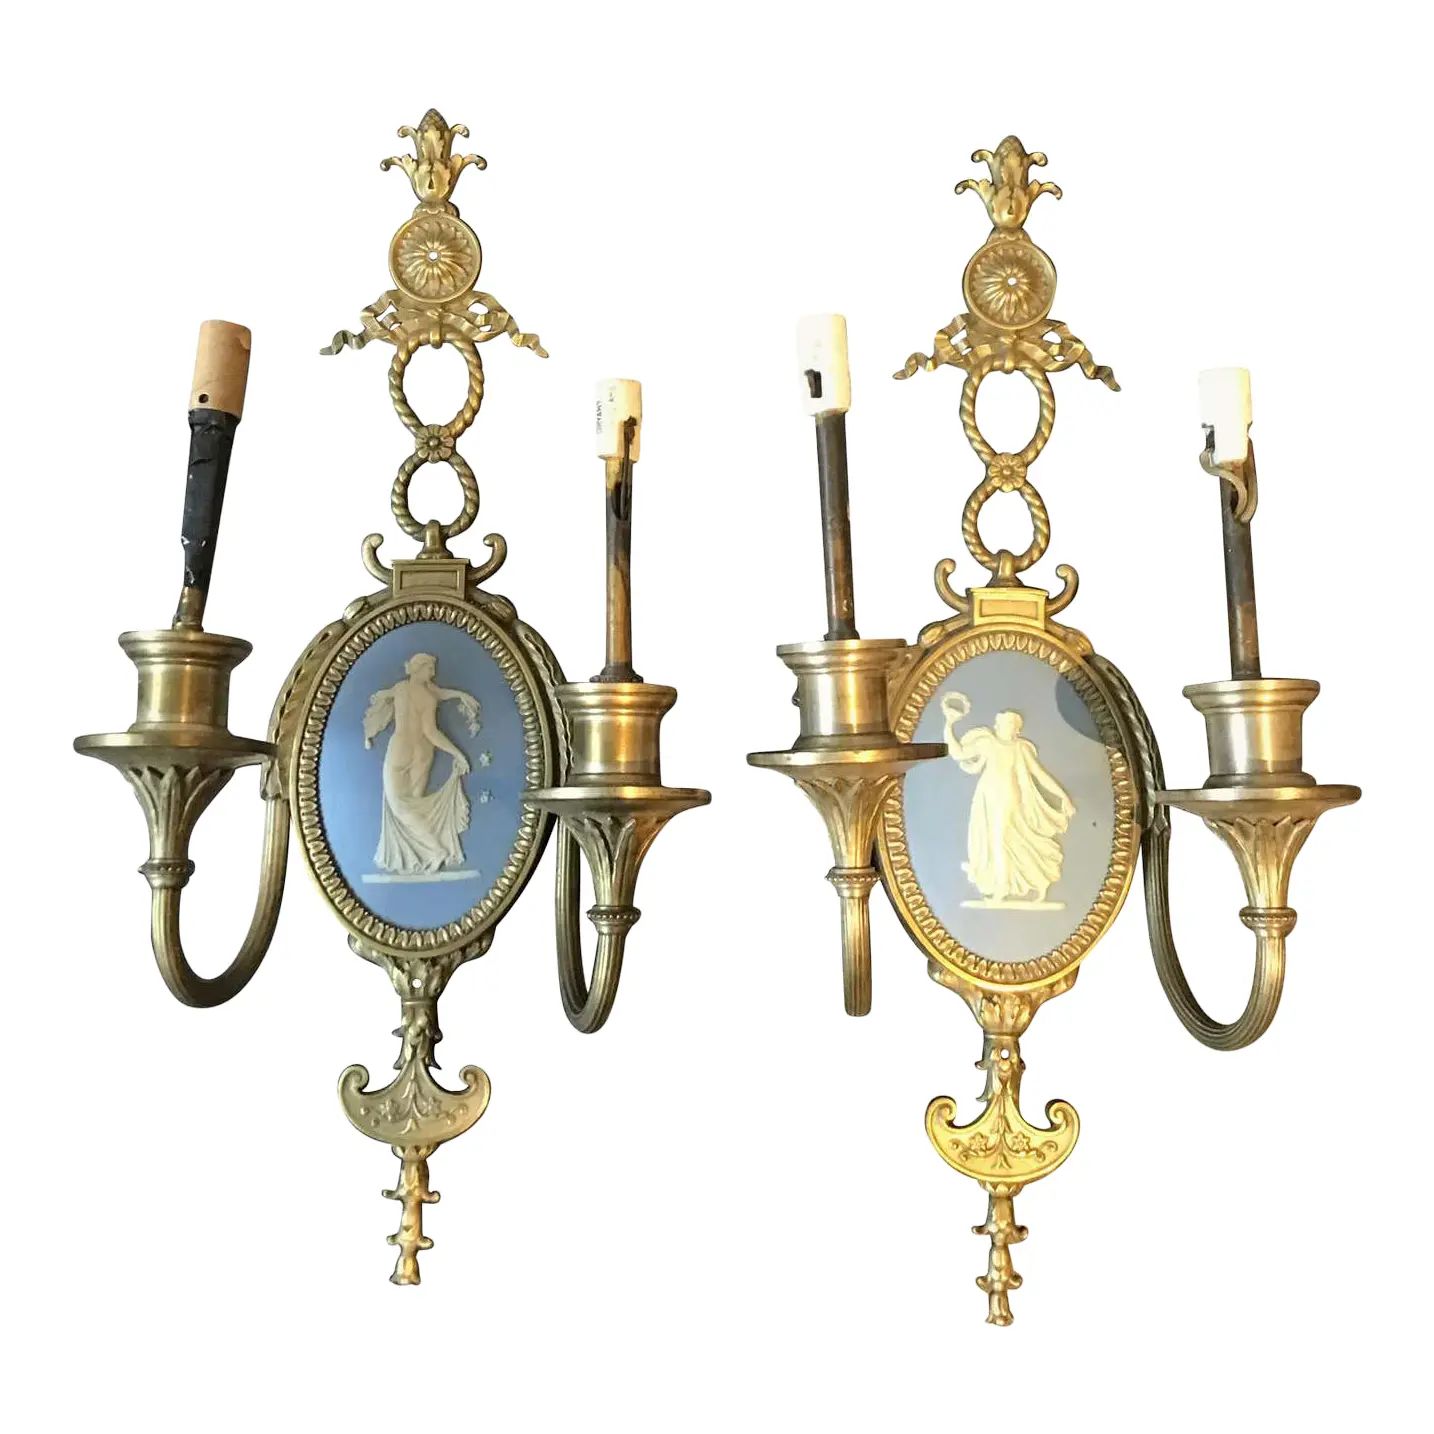 1940s Wedgwood Sconces - A Pair | Chairish